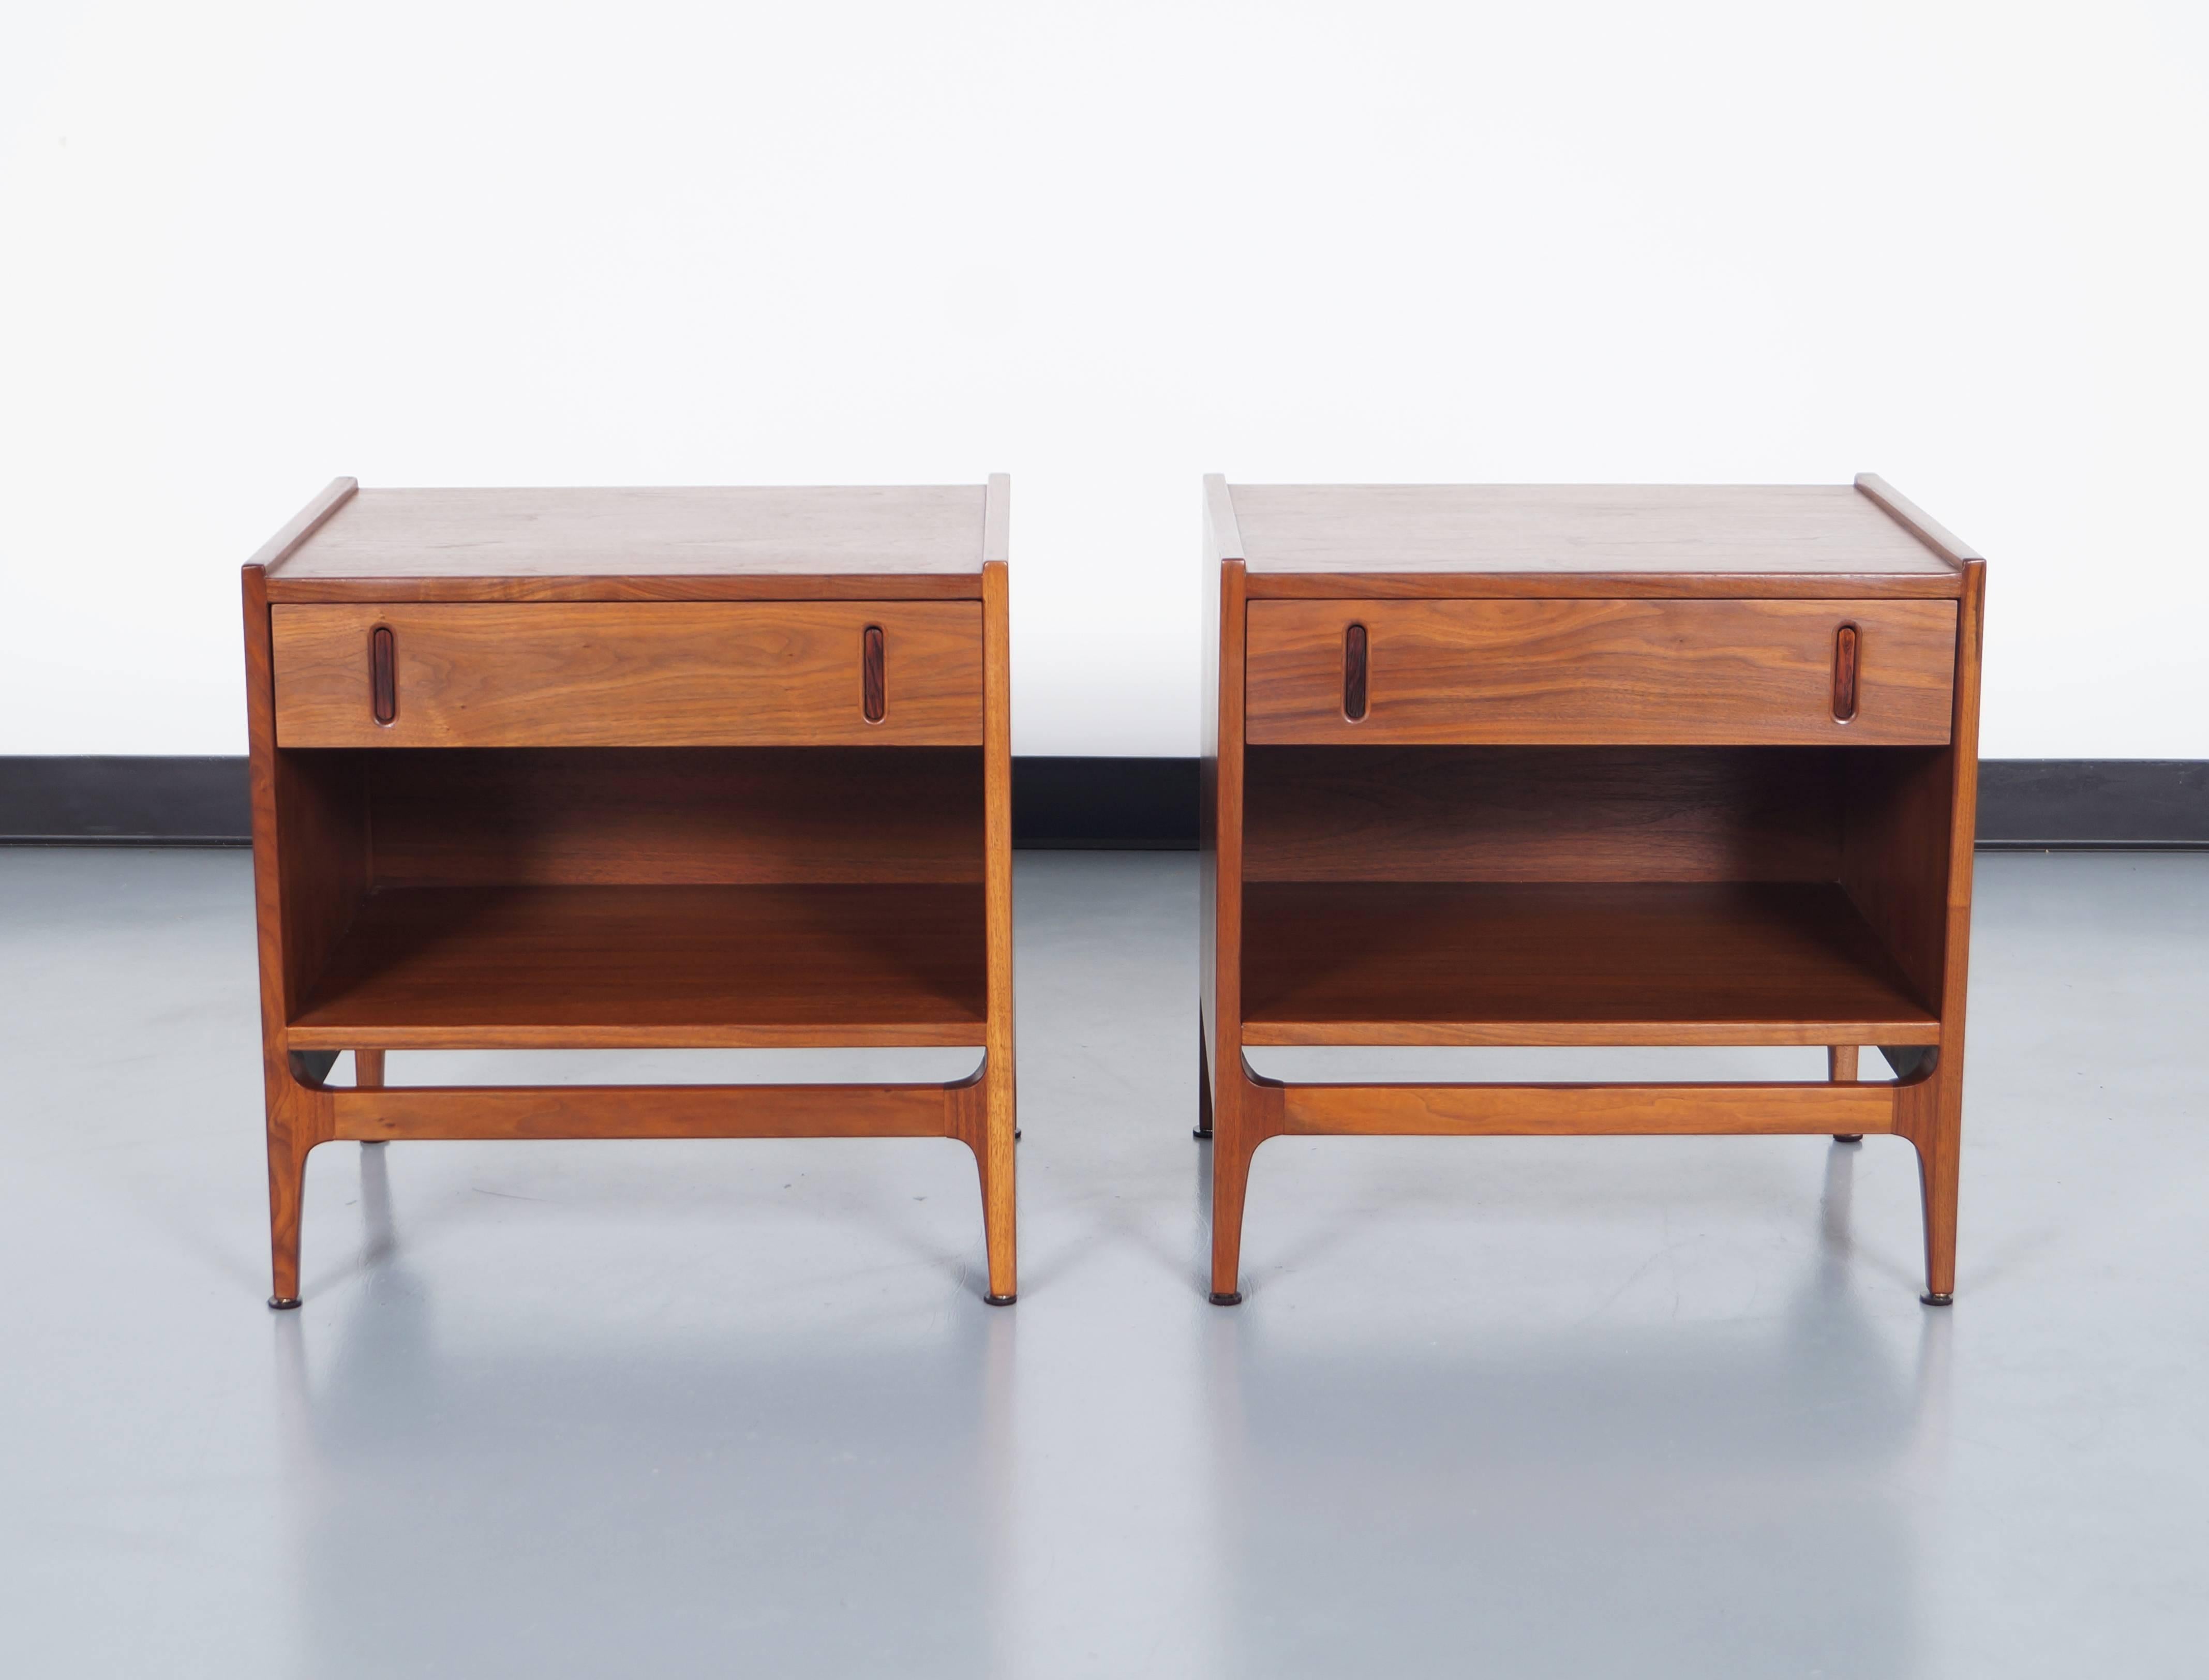 Fabulous nightstands designed by Richard Thompson for Glenn of California. Made in walnut with sculptural rosewood pulls.